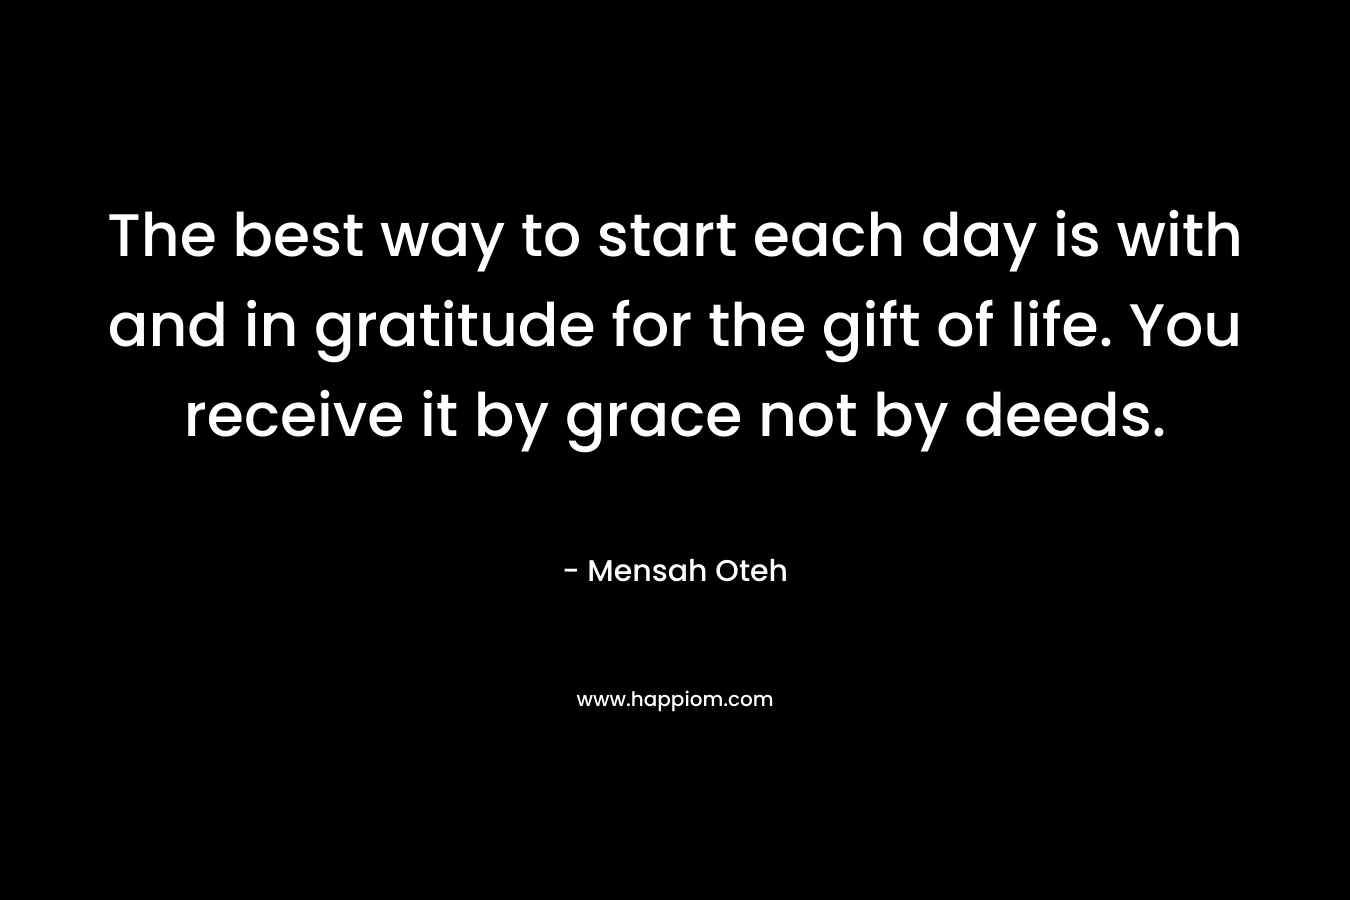 The best way to start each day is with and in gratitude for the gift of life. You receive it by grace not by deeds.